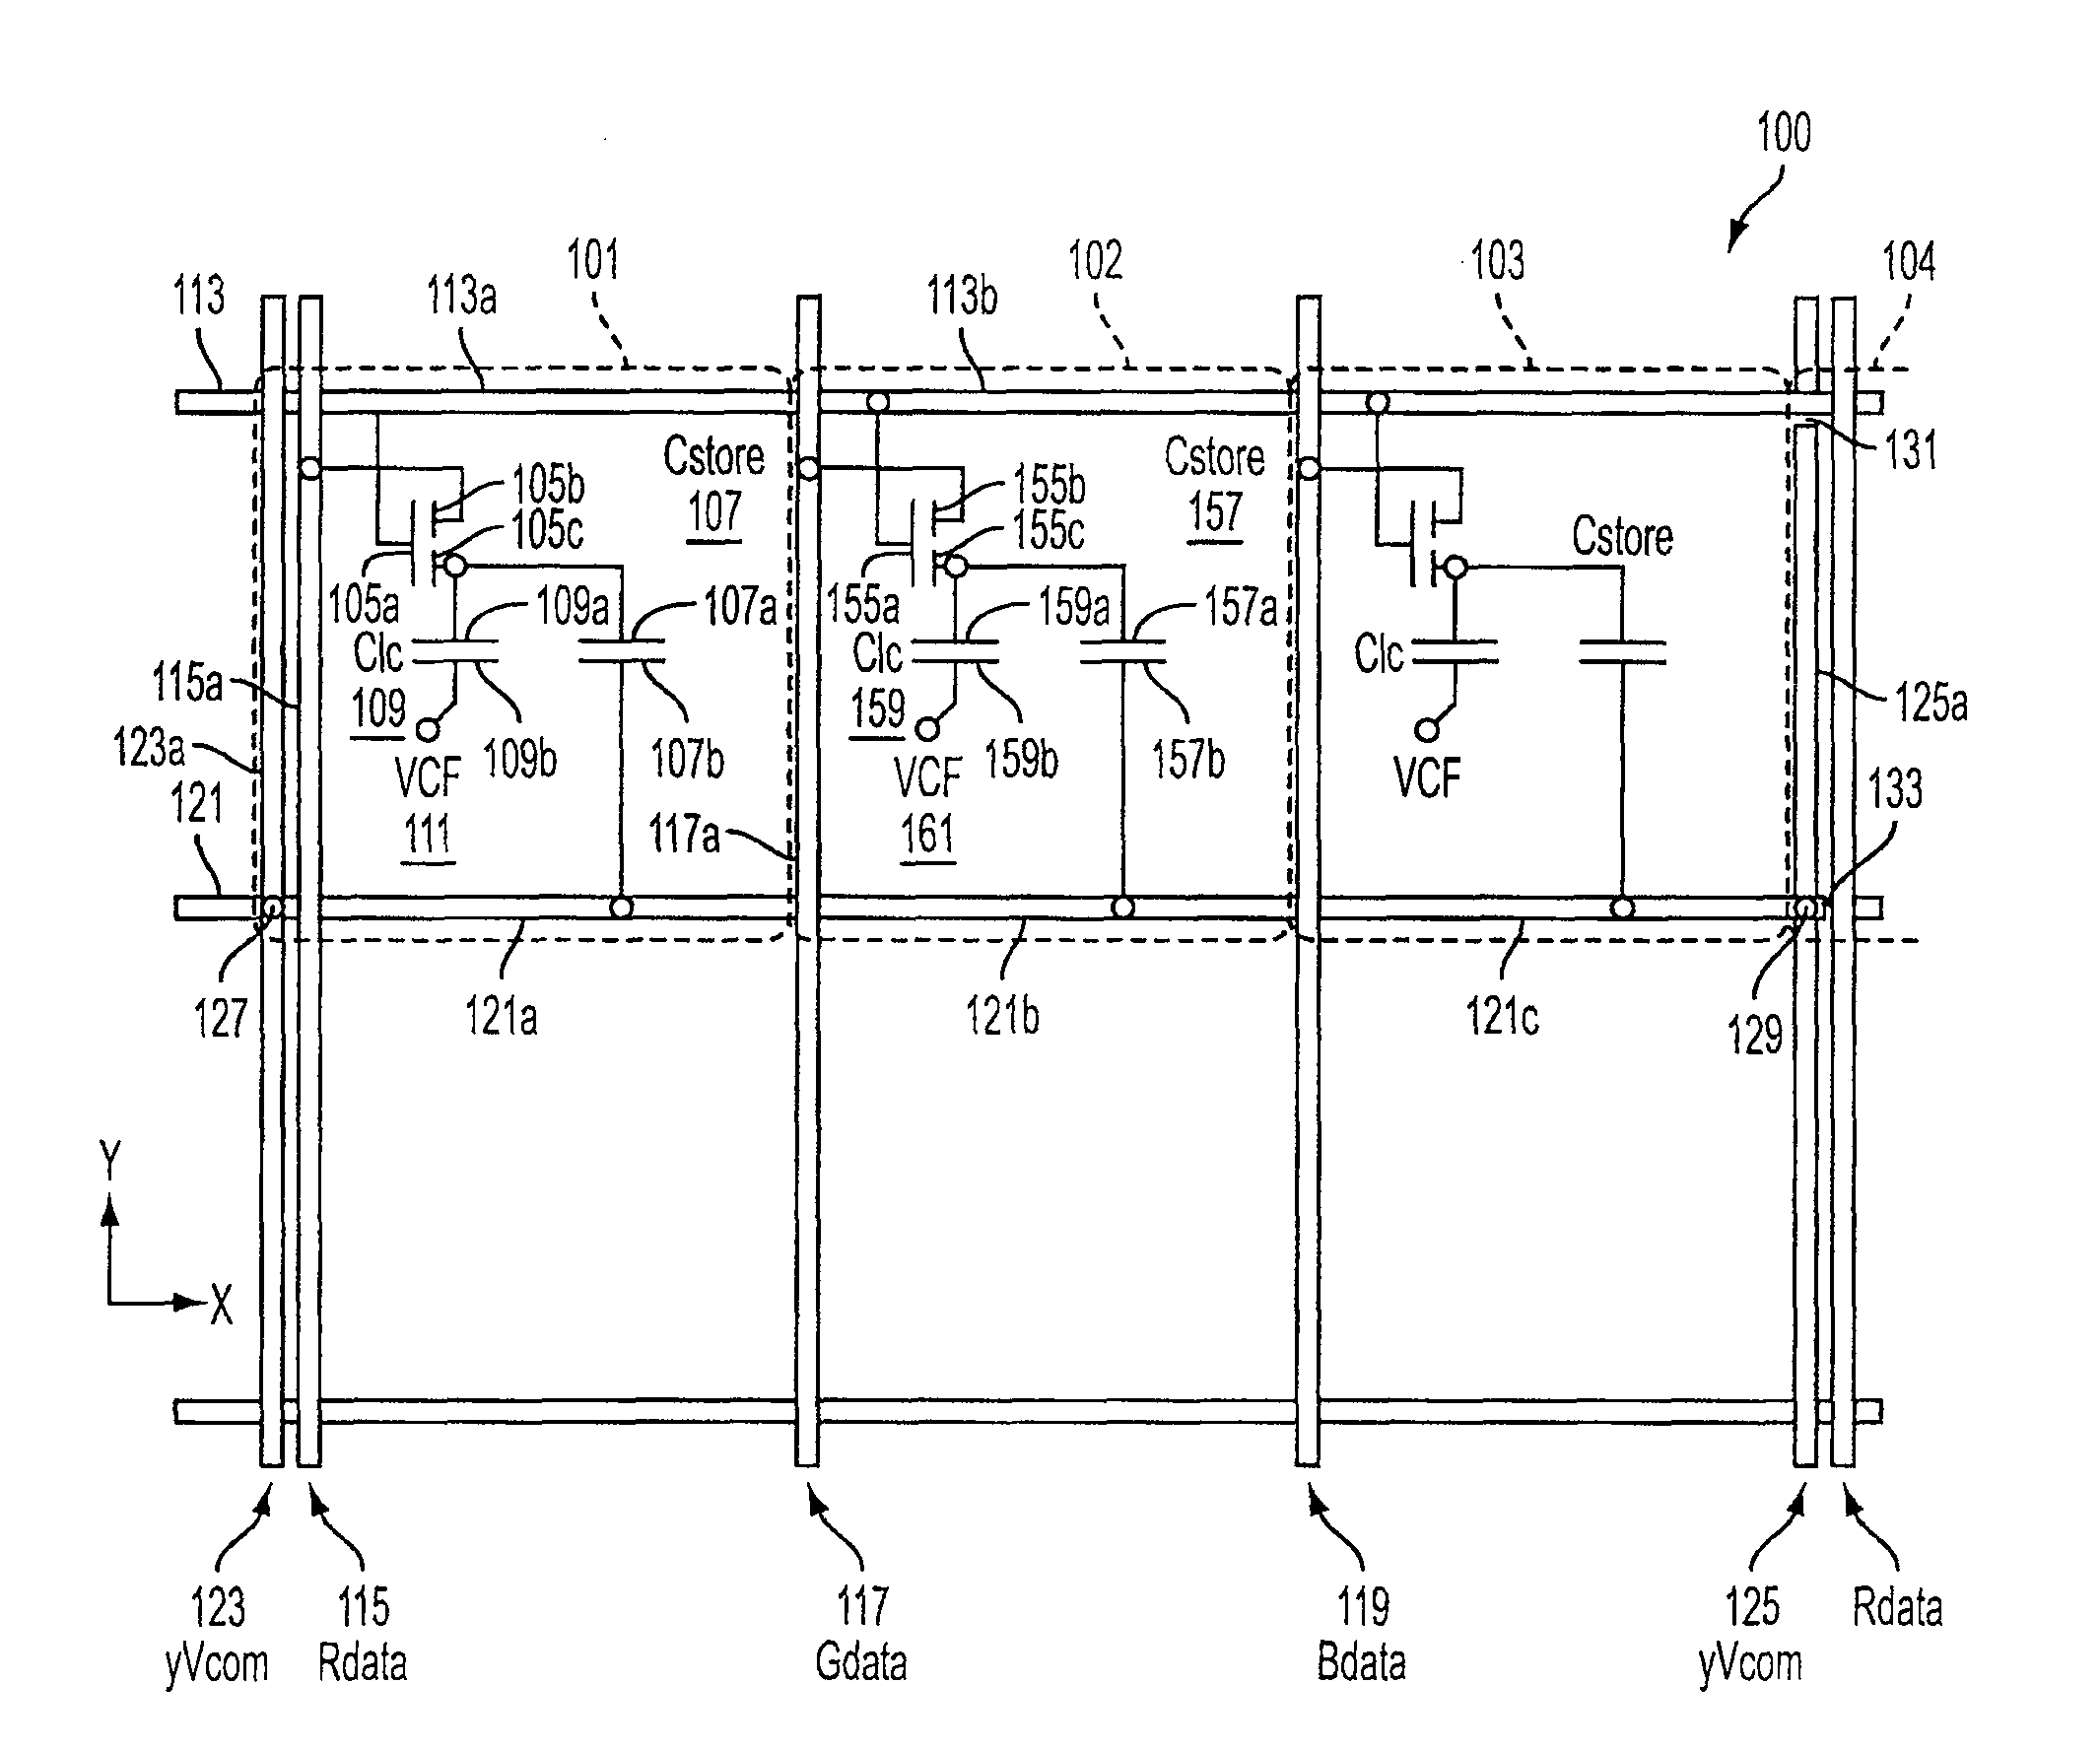 Touch sensor panels with reduced static capacitance